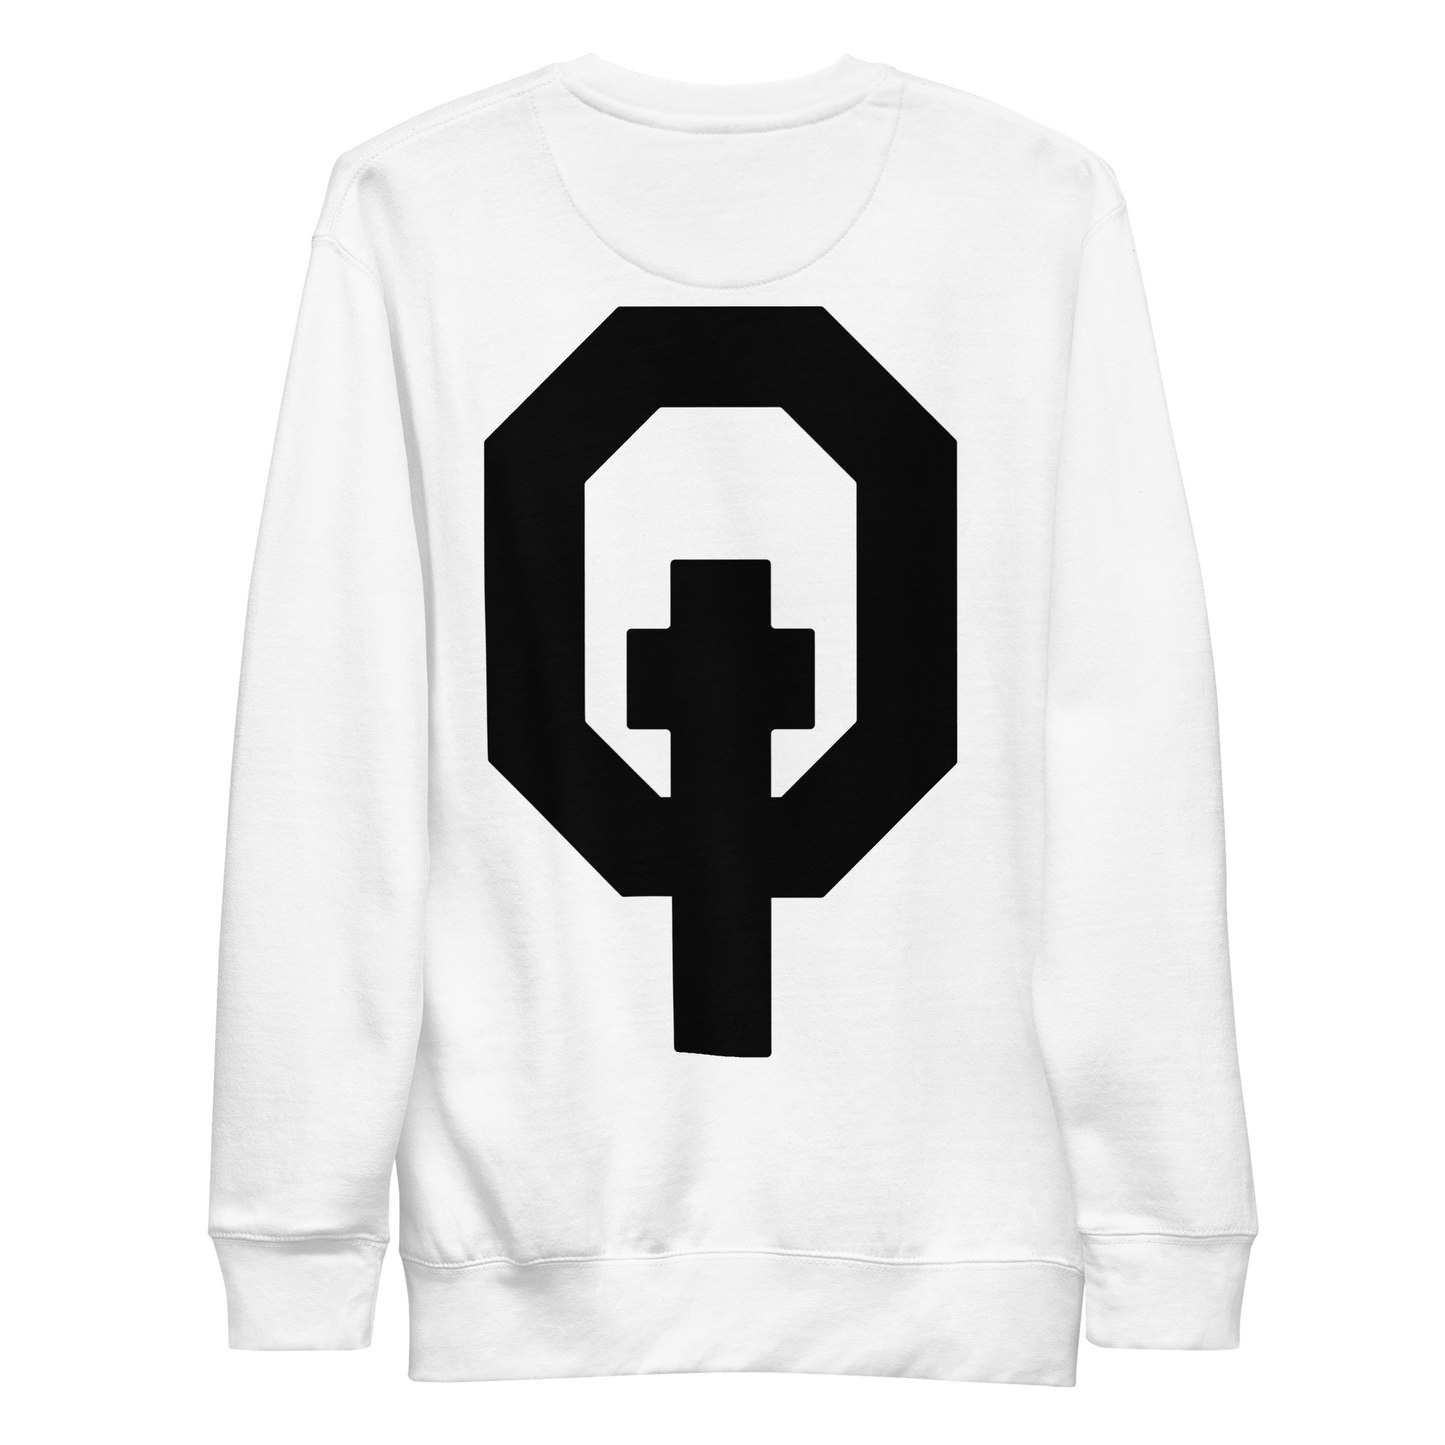 Equippd Logo White Crew Sweatshirt - Clarity Collection